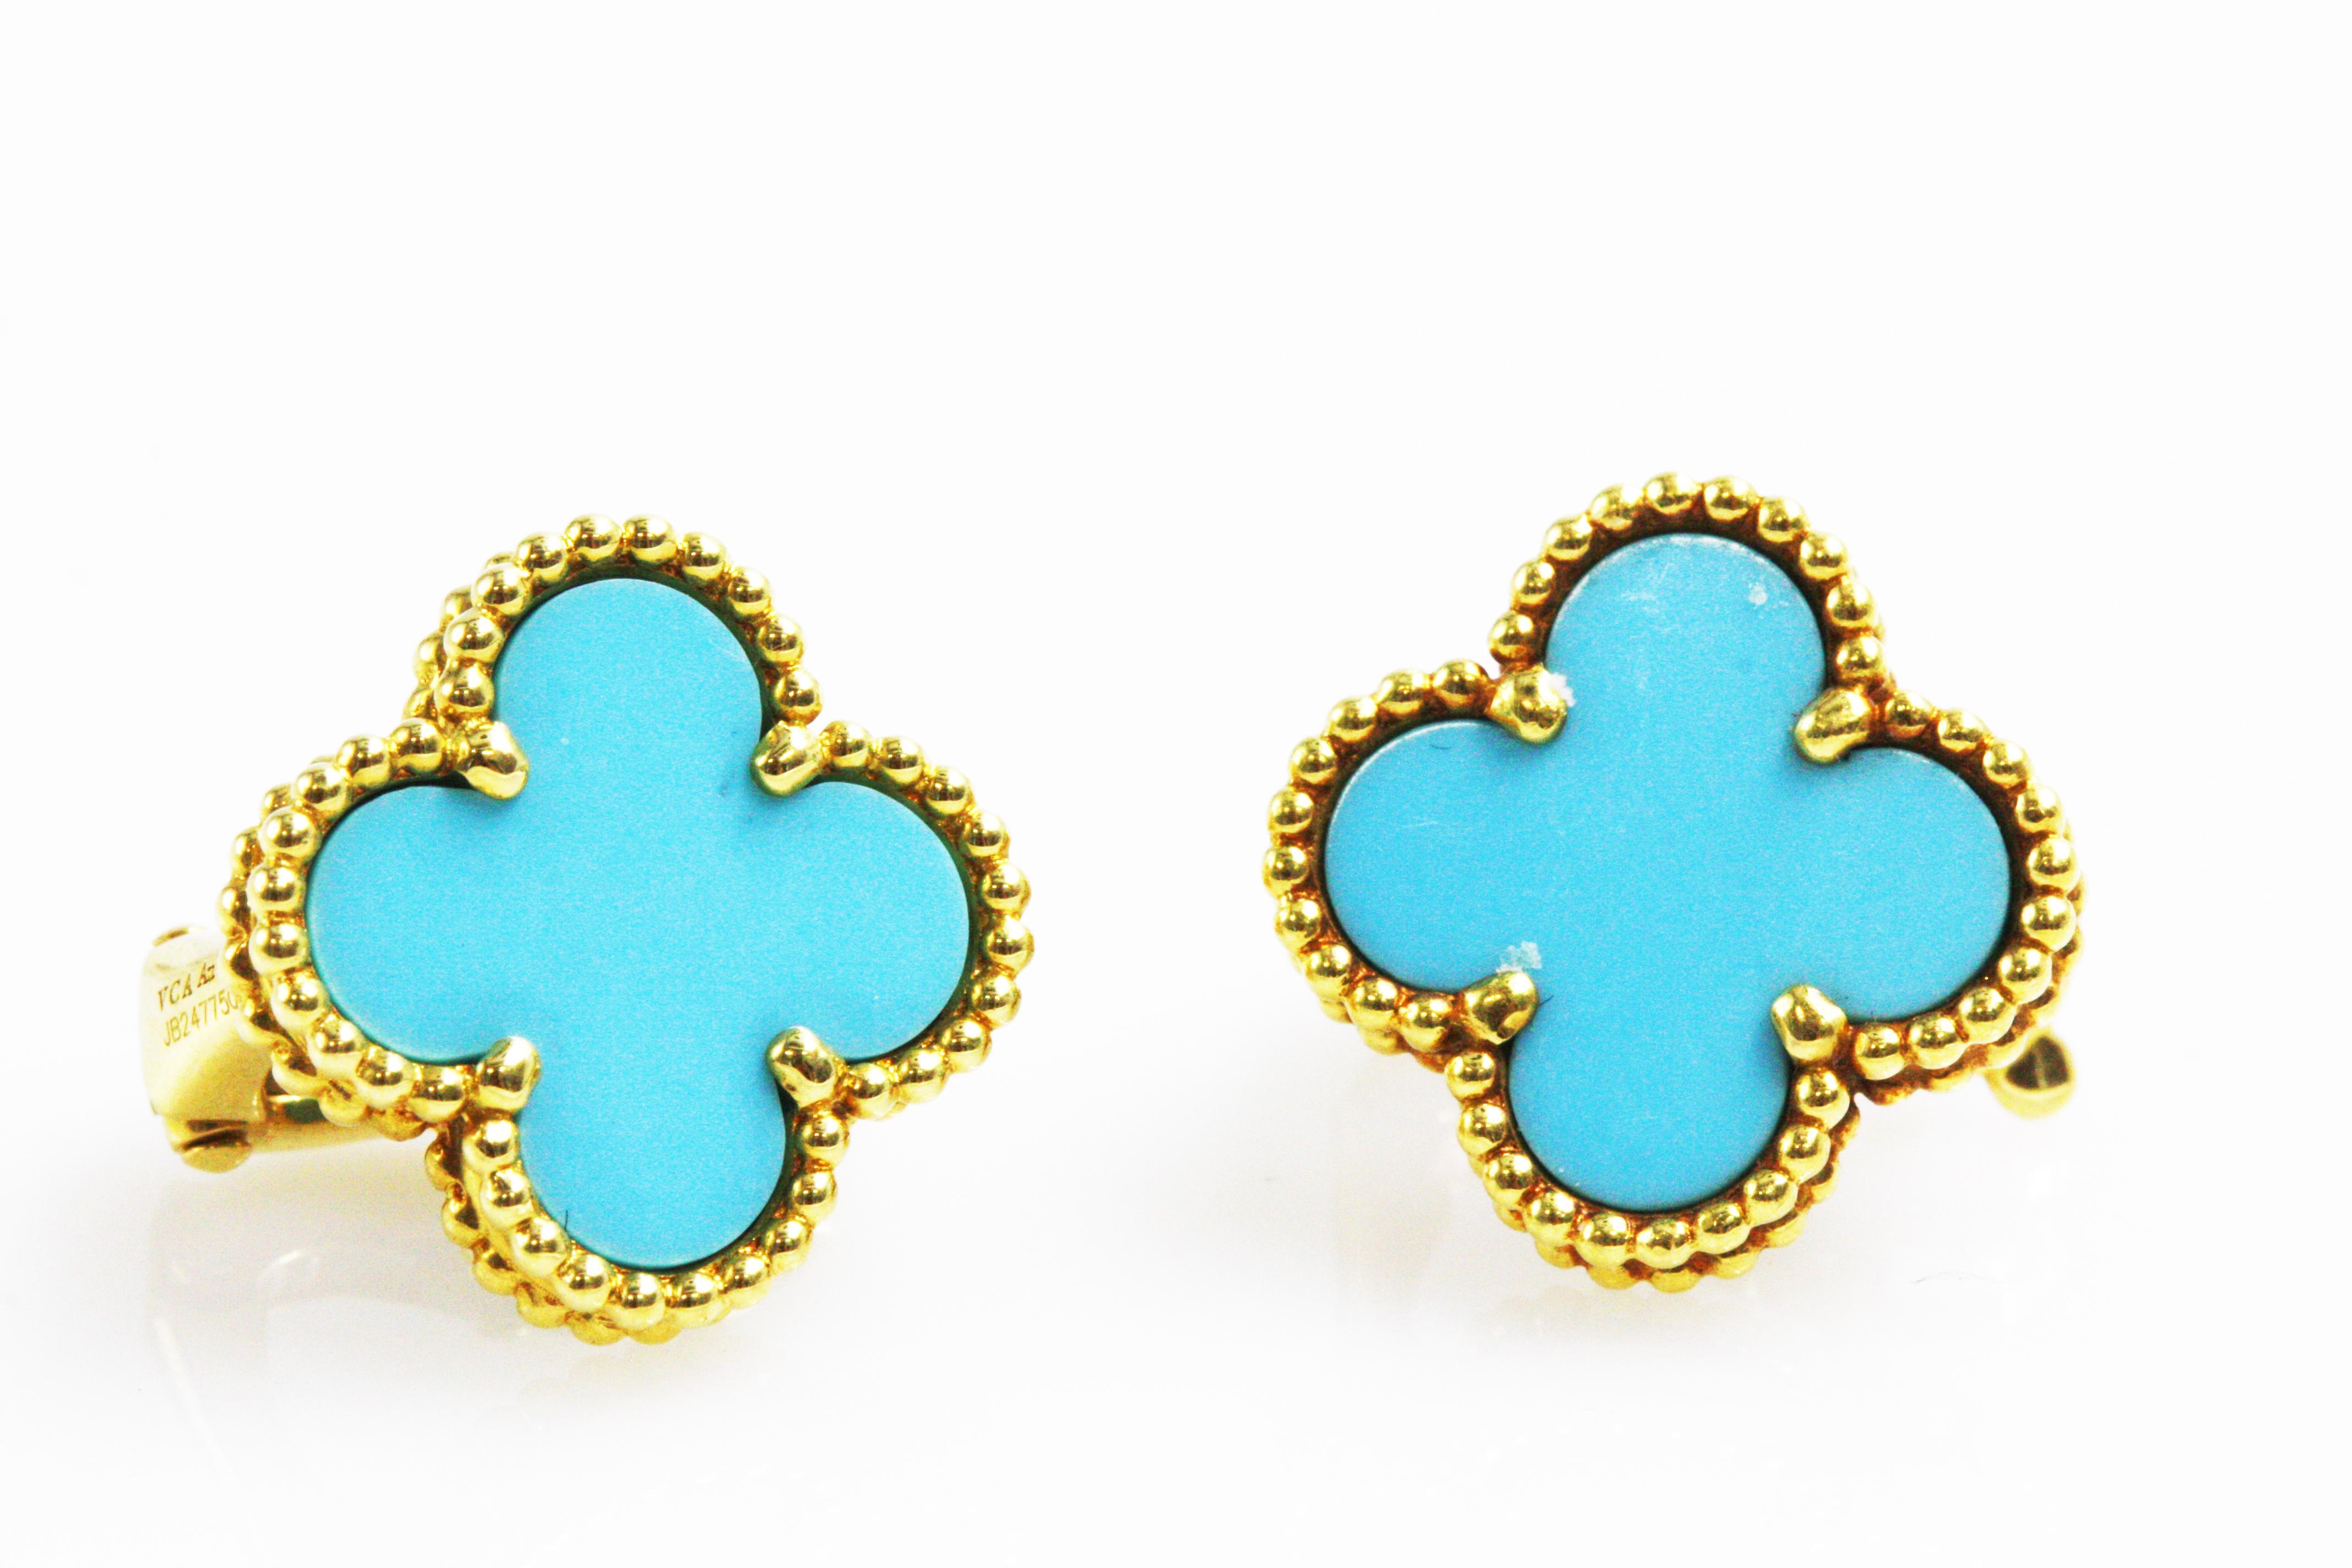 Van Cleef & Arpels 18K Yellow Gold Turquoise Earring

Stones
Turquoise : 2 stones
Size: 1.5 x 1.5 cm

Item will come with a box and paper
Stock#: VCA308

